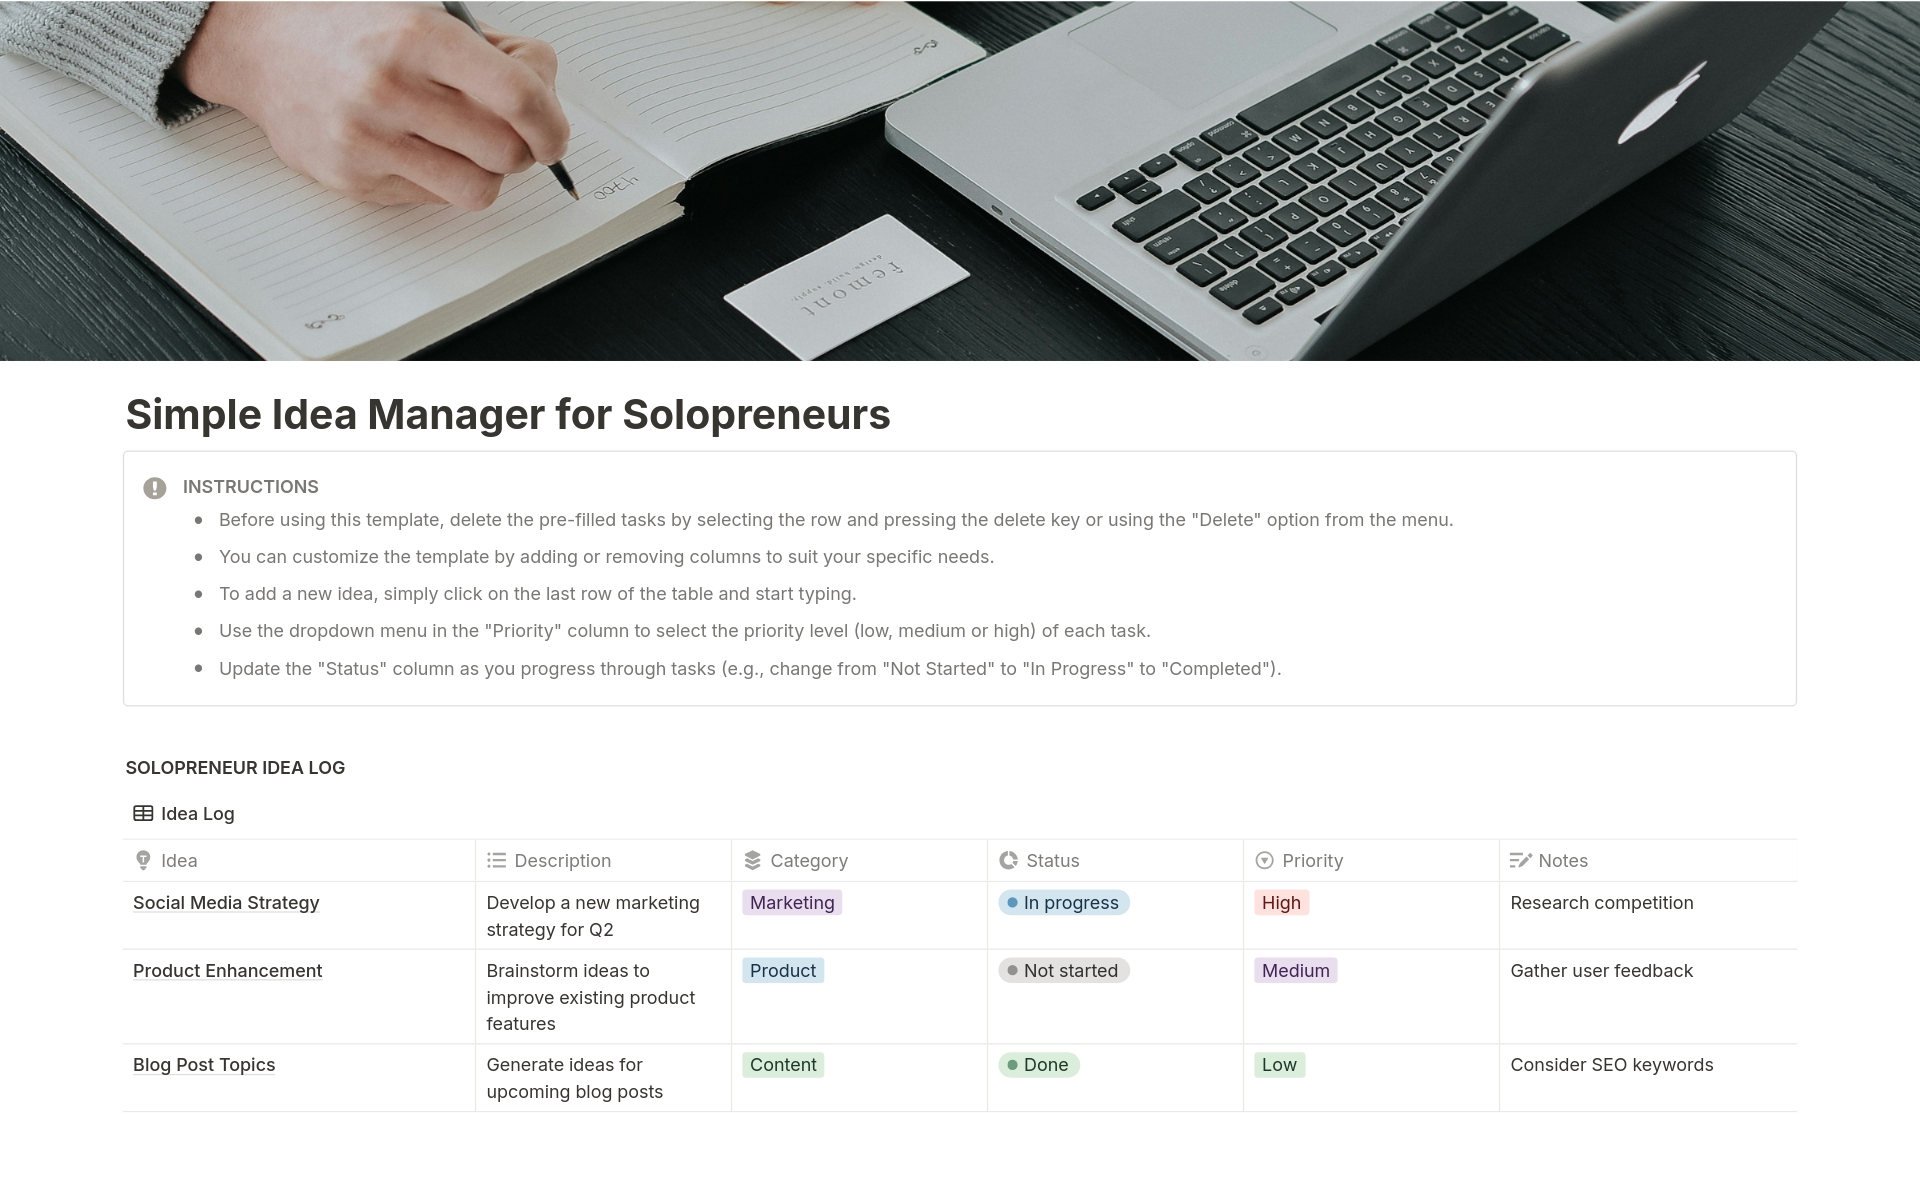 Simple Idea Manager for Solopreneursのテンプレートのプレビュー